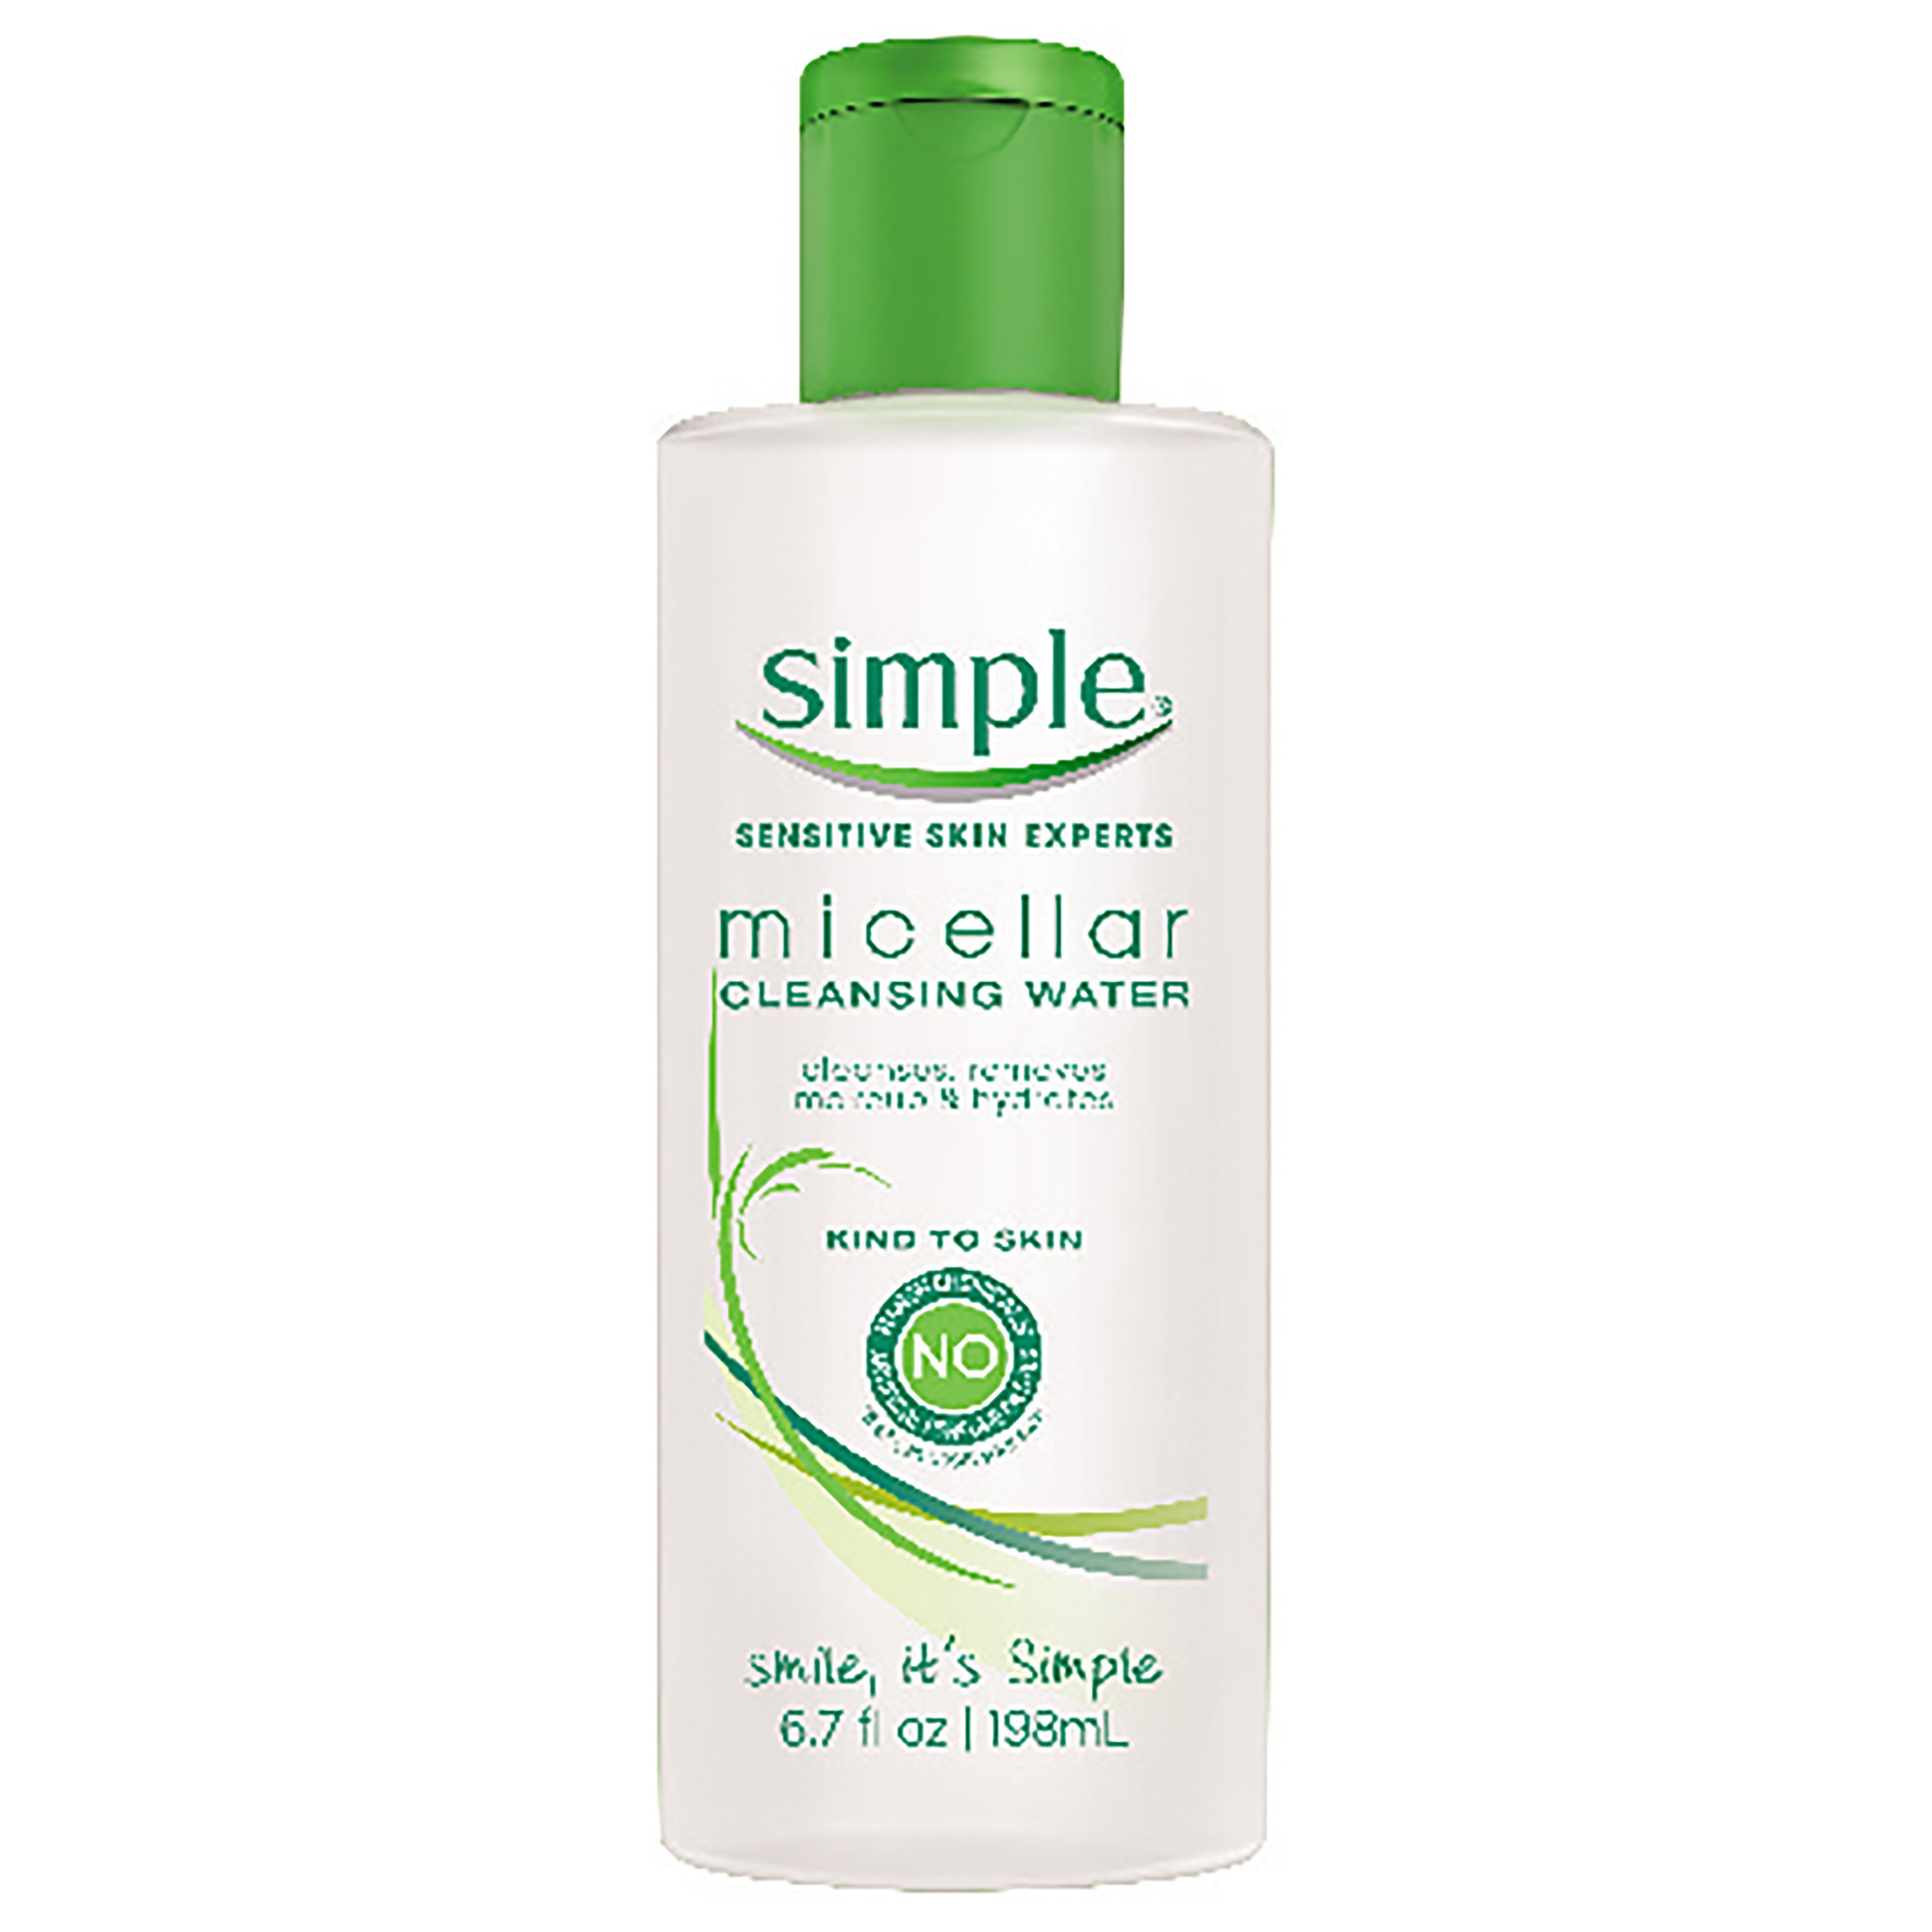 Simple cleanser